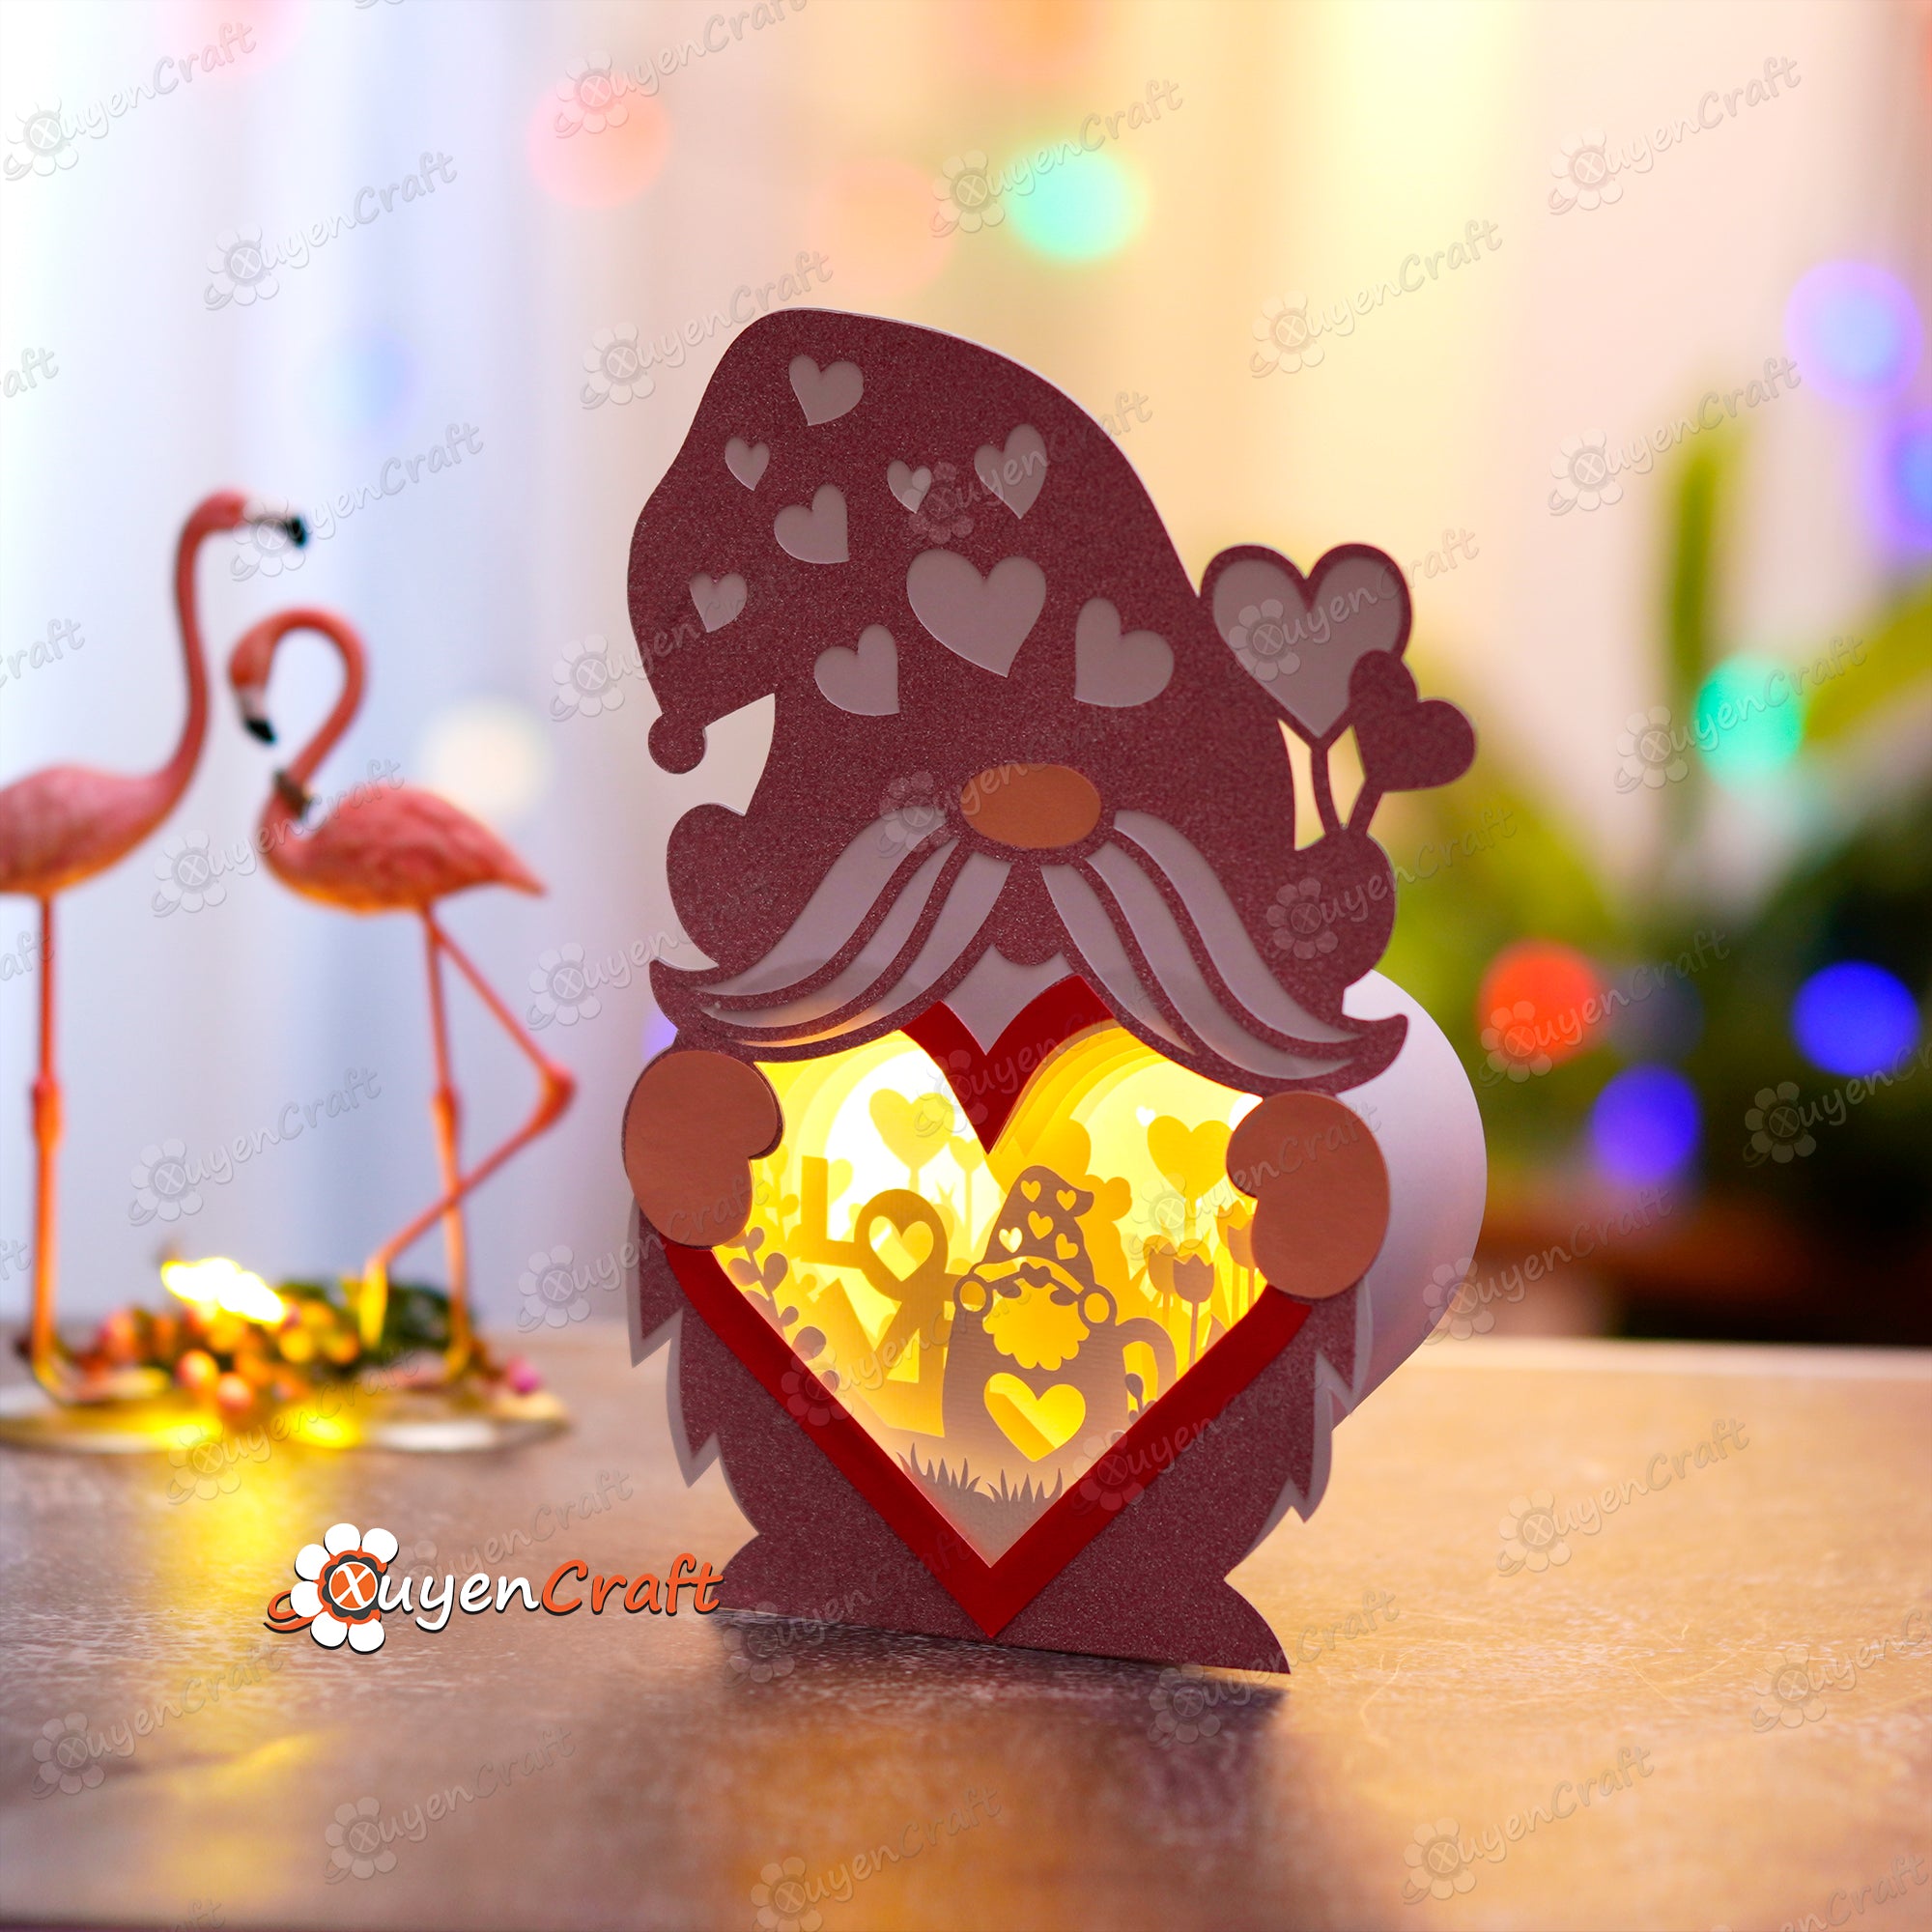 Pack 3 Heart Gnome Shadow Box PDF, SVG Light Box for Cricut Projects - DIY Heart Lantern for Valentine's Day, Love, Cup Gnome, Archery Gnome